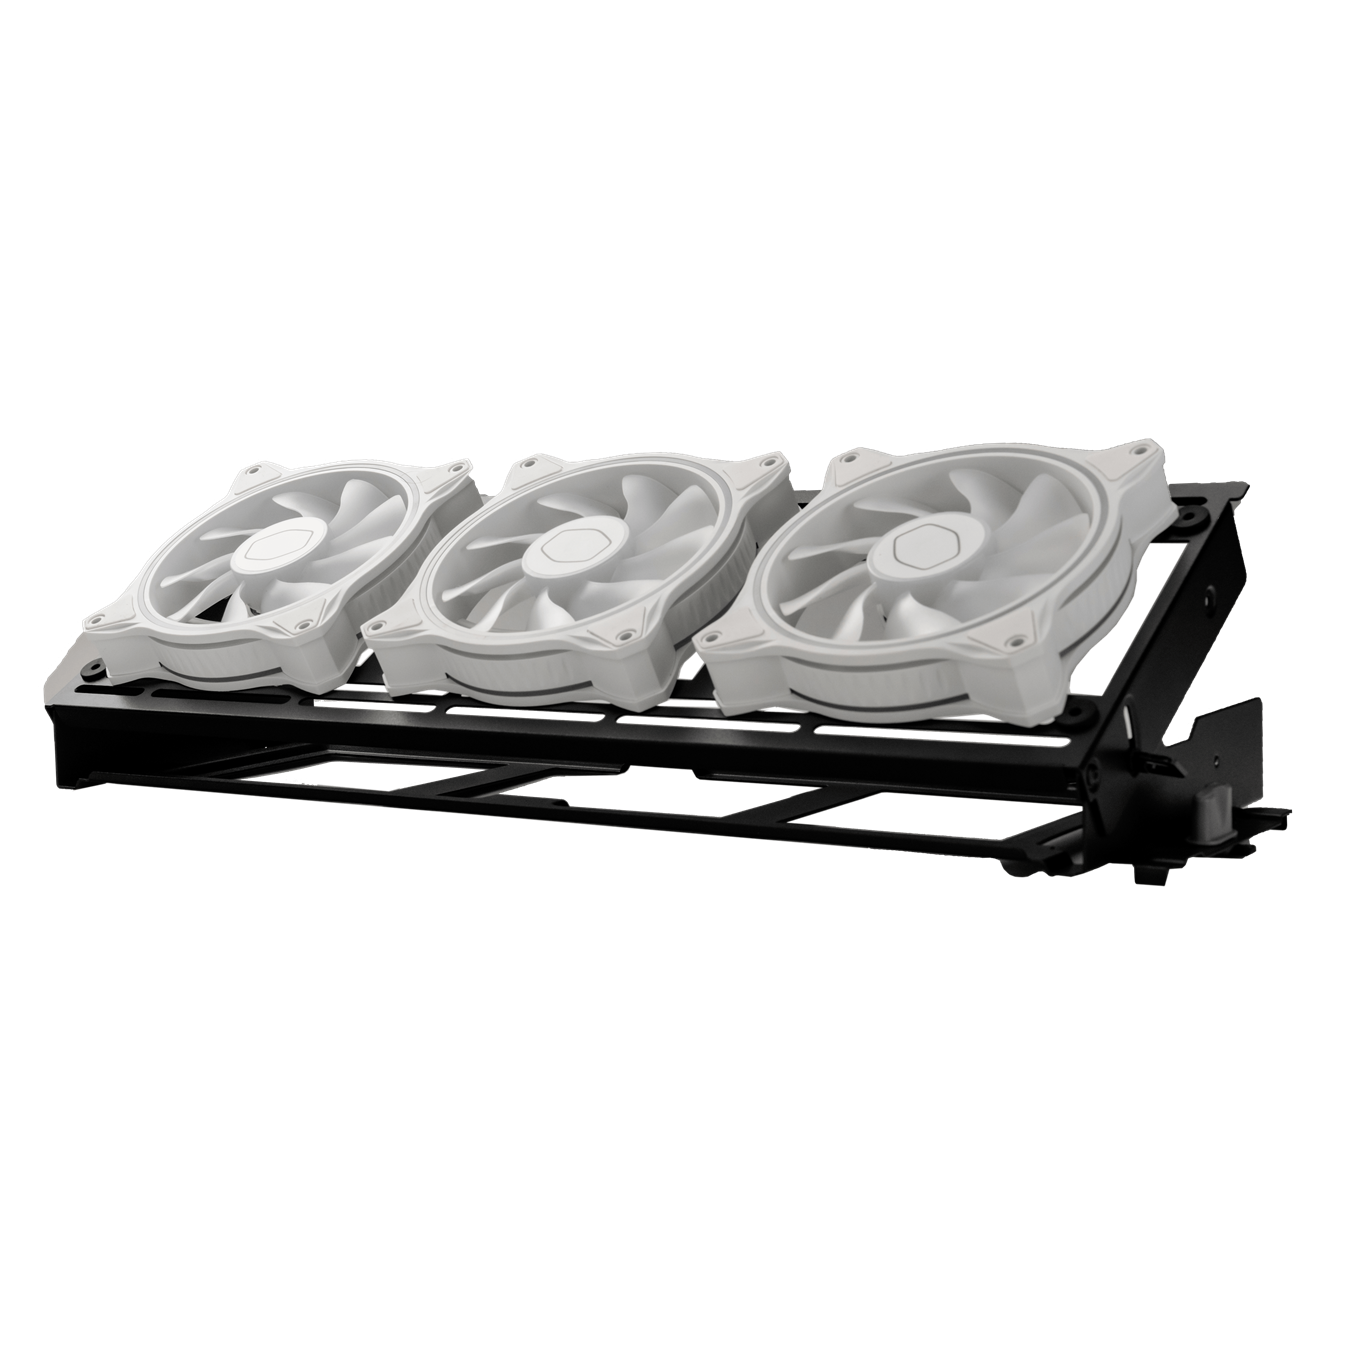 HAF 700 boasts a fully modular, rotatable fan/radiator bracket which can be installed in multiple positions for complex setups.